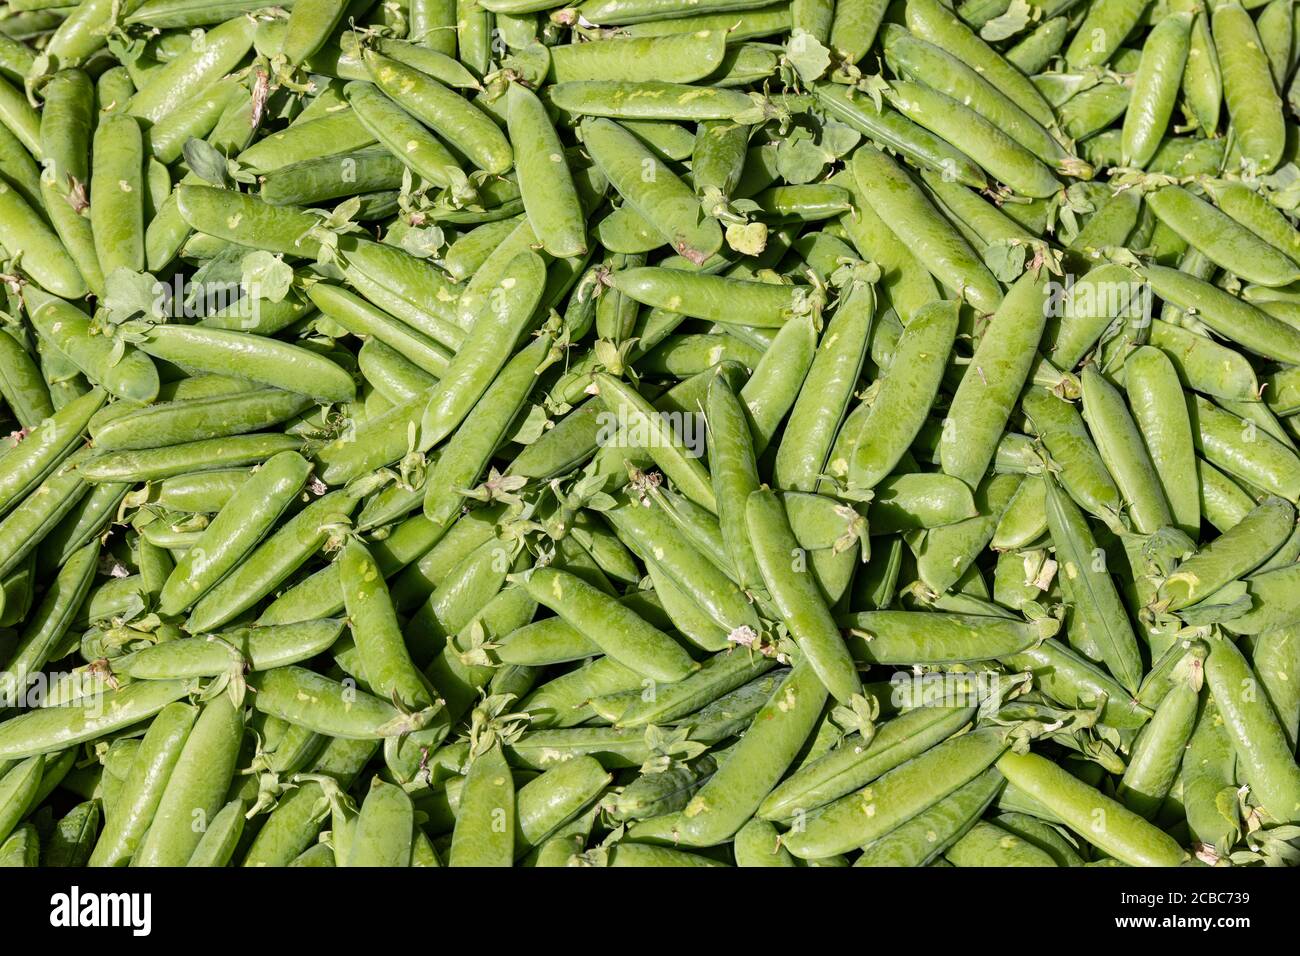 Peas or pea pods on sale at market square Stock Photo